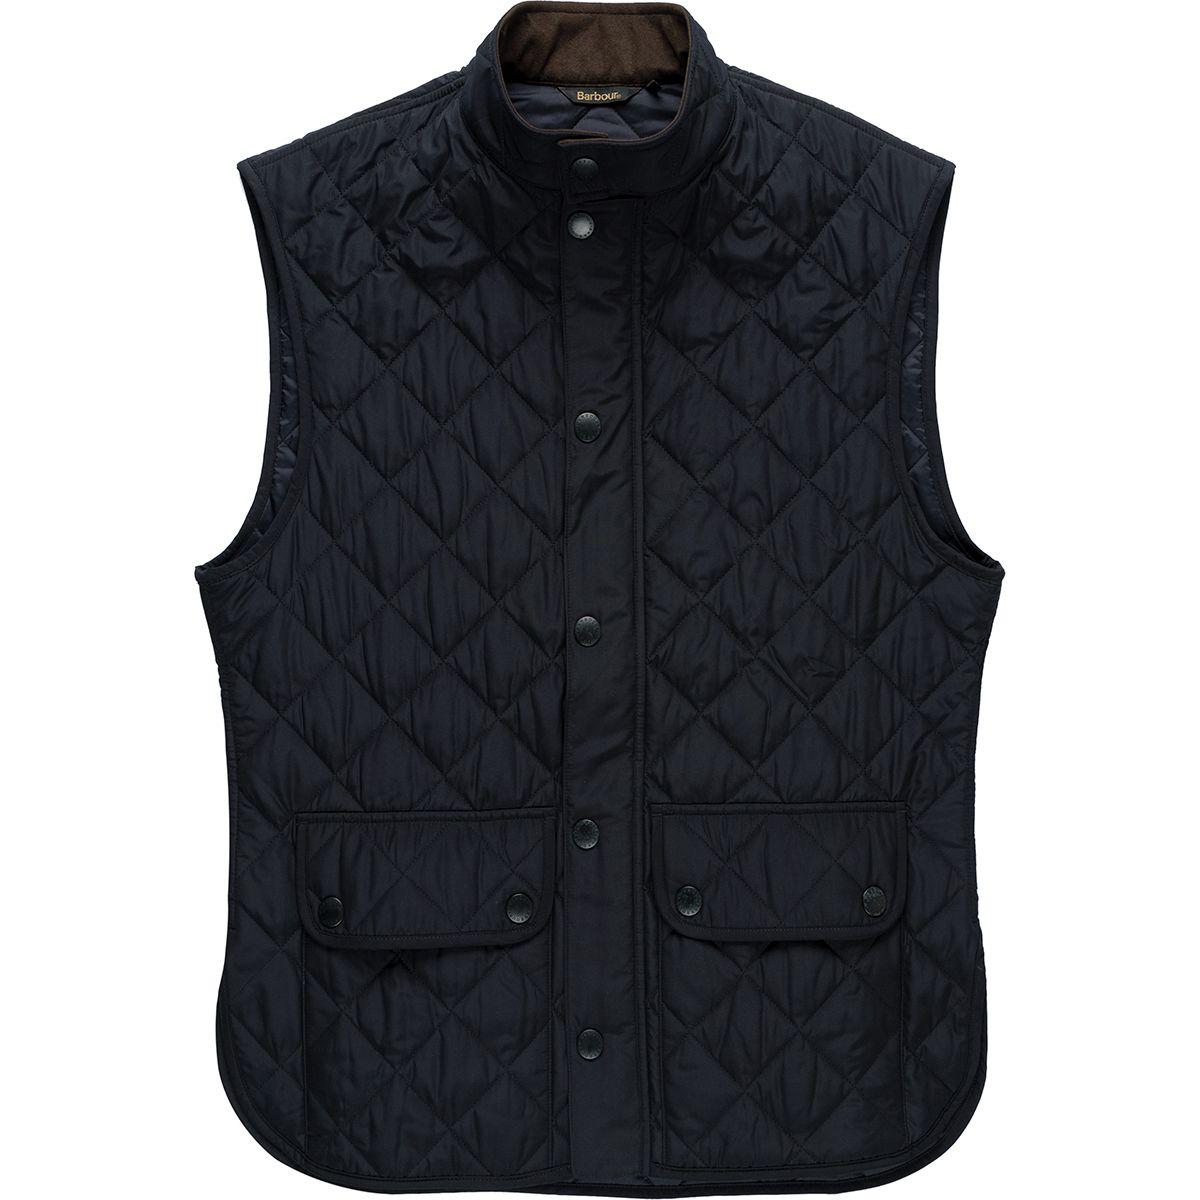 Barbour Synthetic Lowerdale Gilet Vest in Navy (Blue) for Men - Lyst